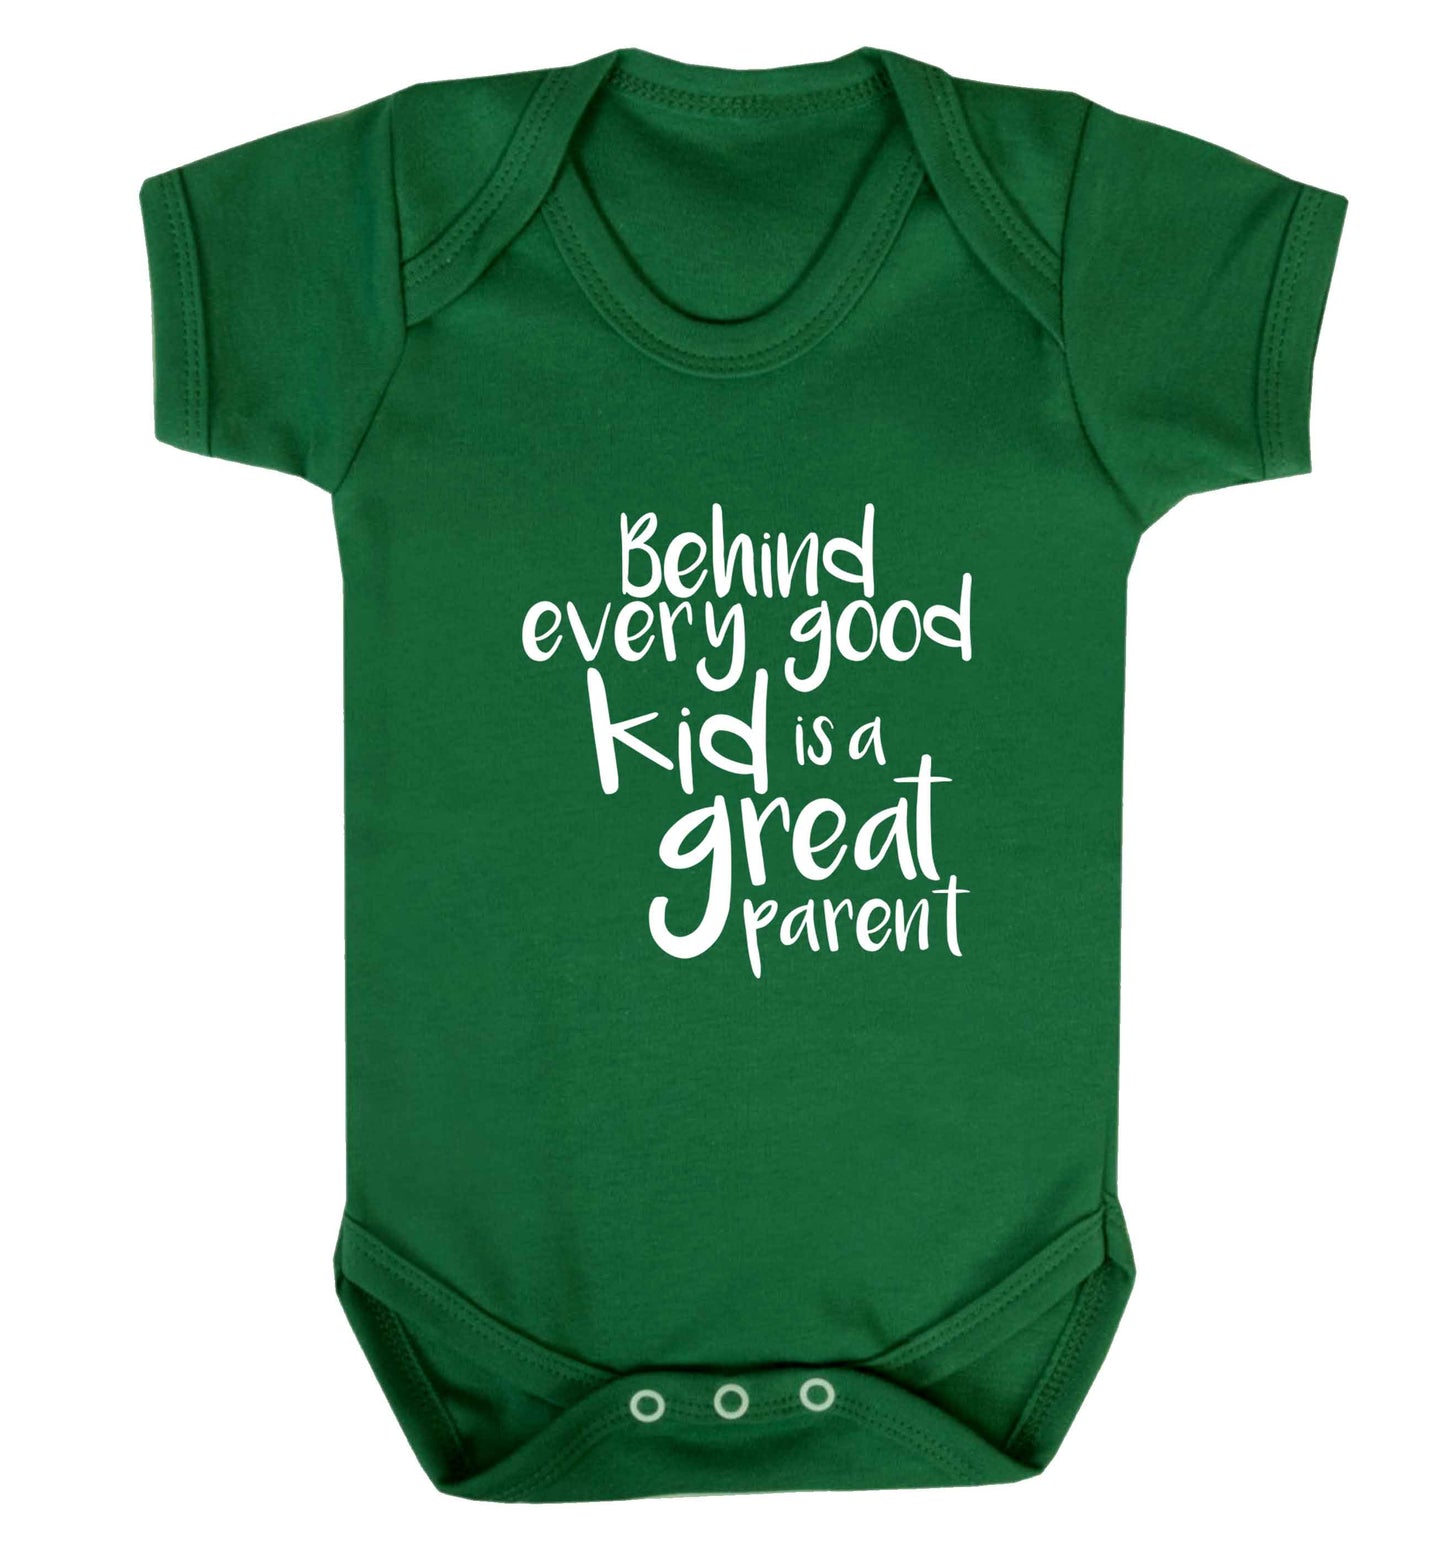 Behind every good kid is a great parent baby vest green 18-24 months